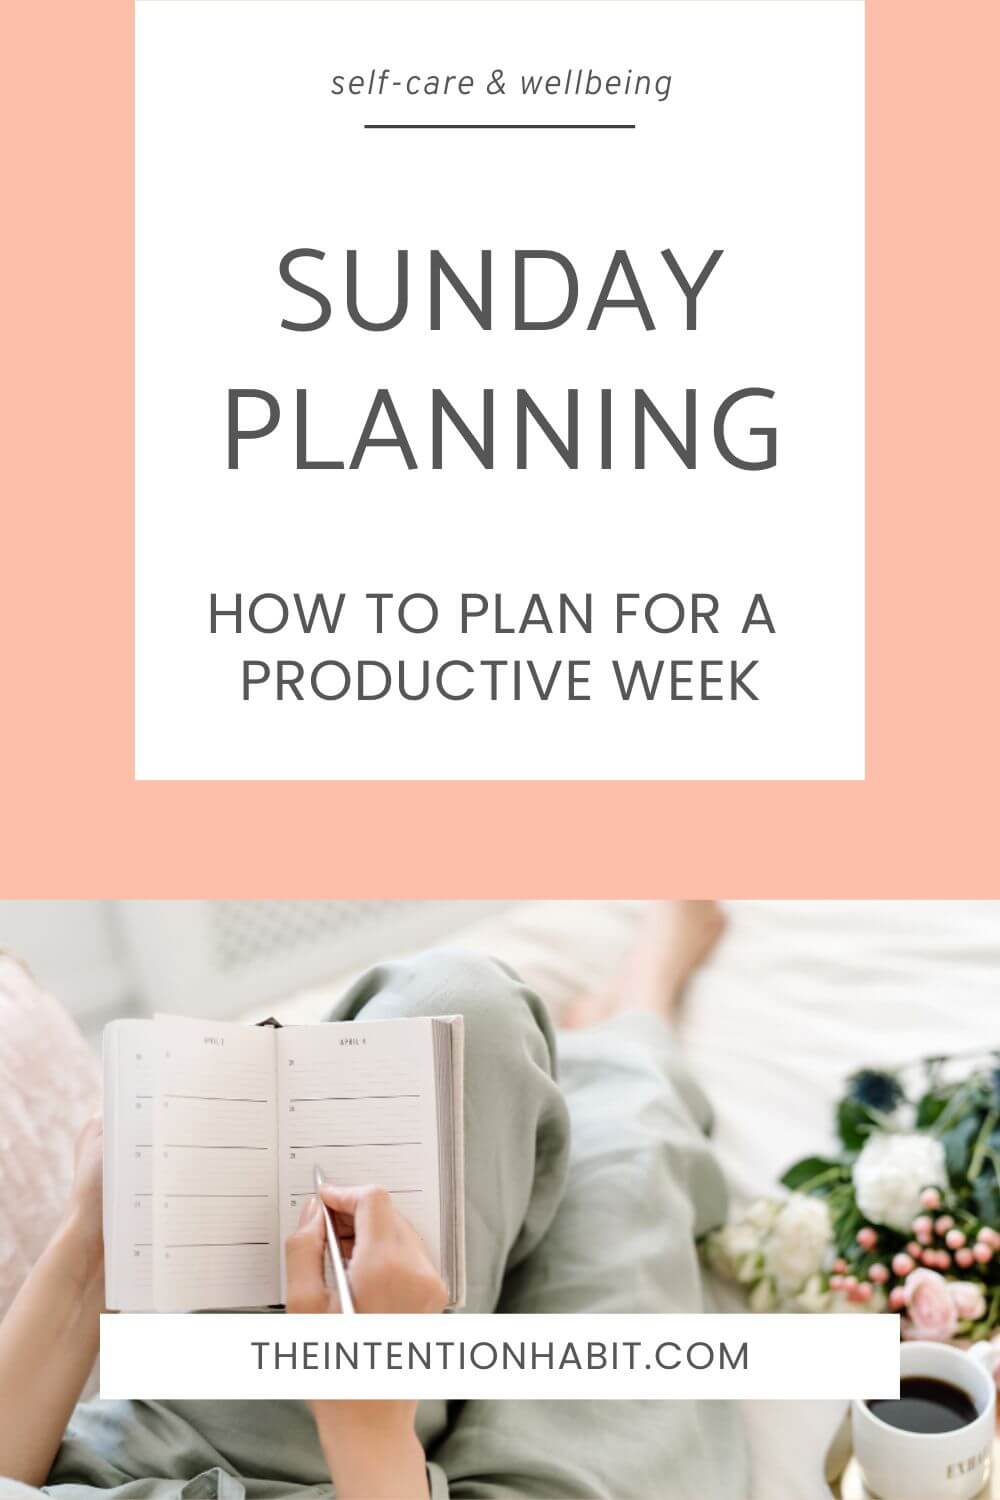 Sunday planning tips how to plan for a productive week